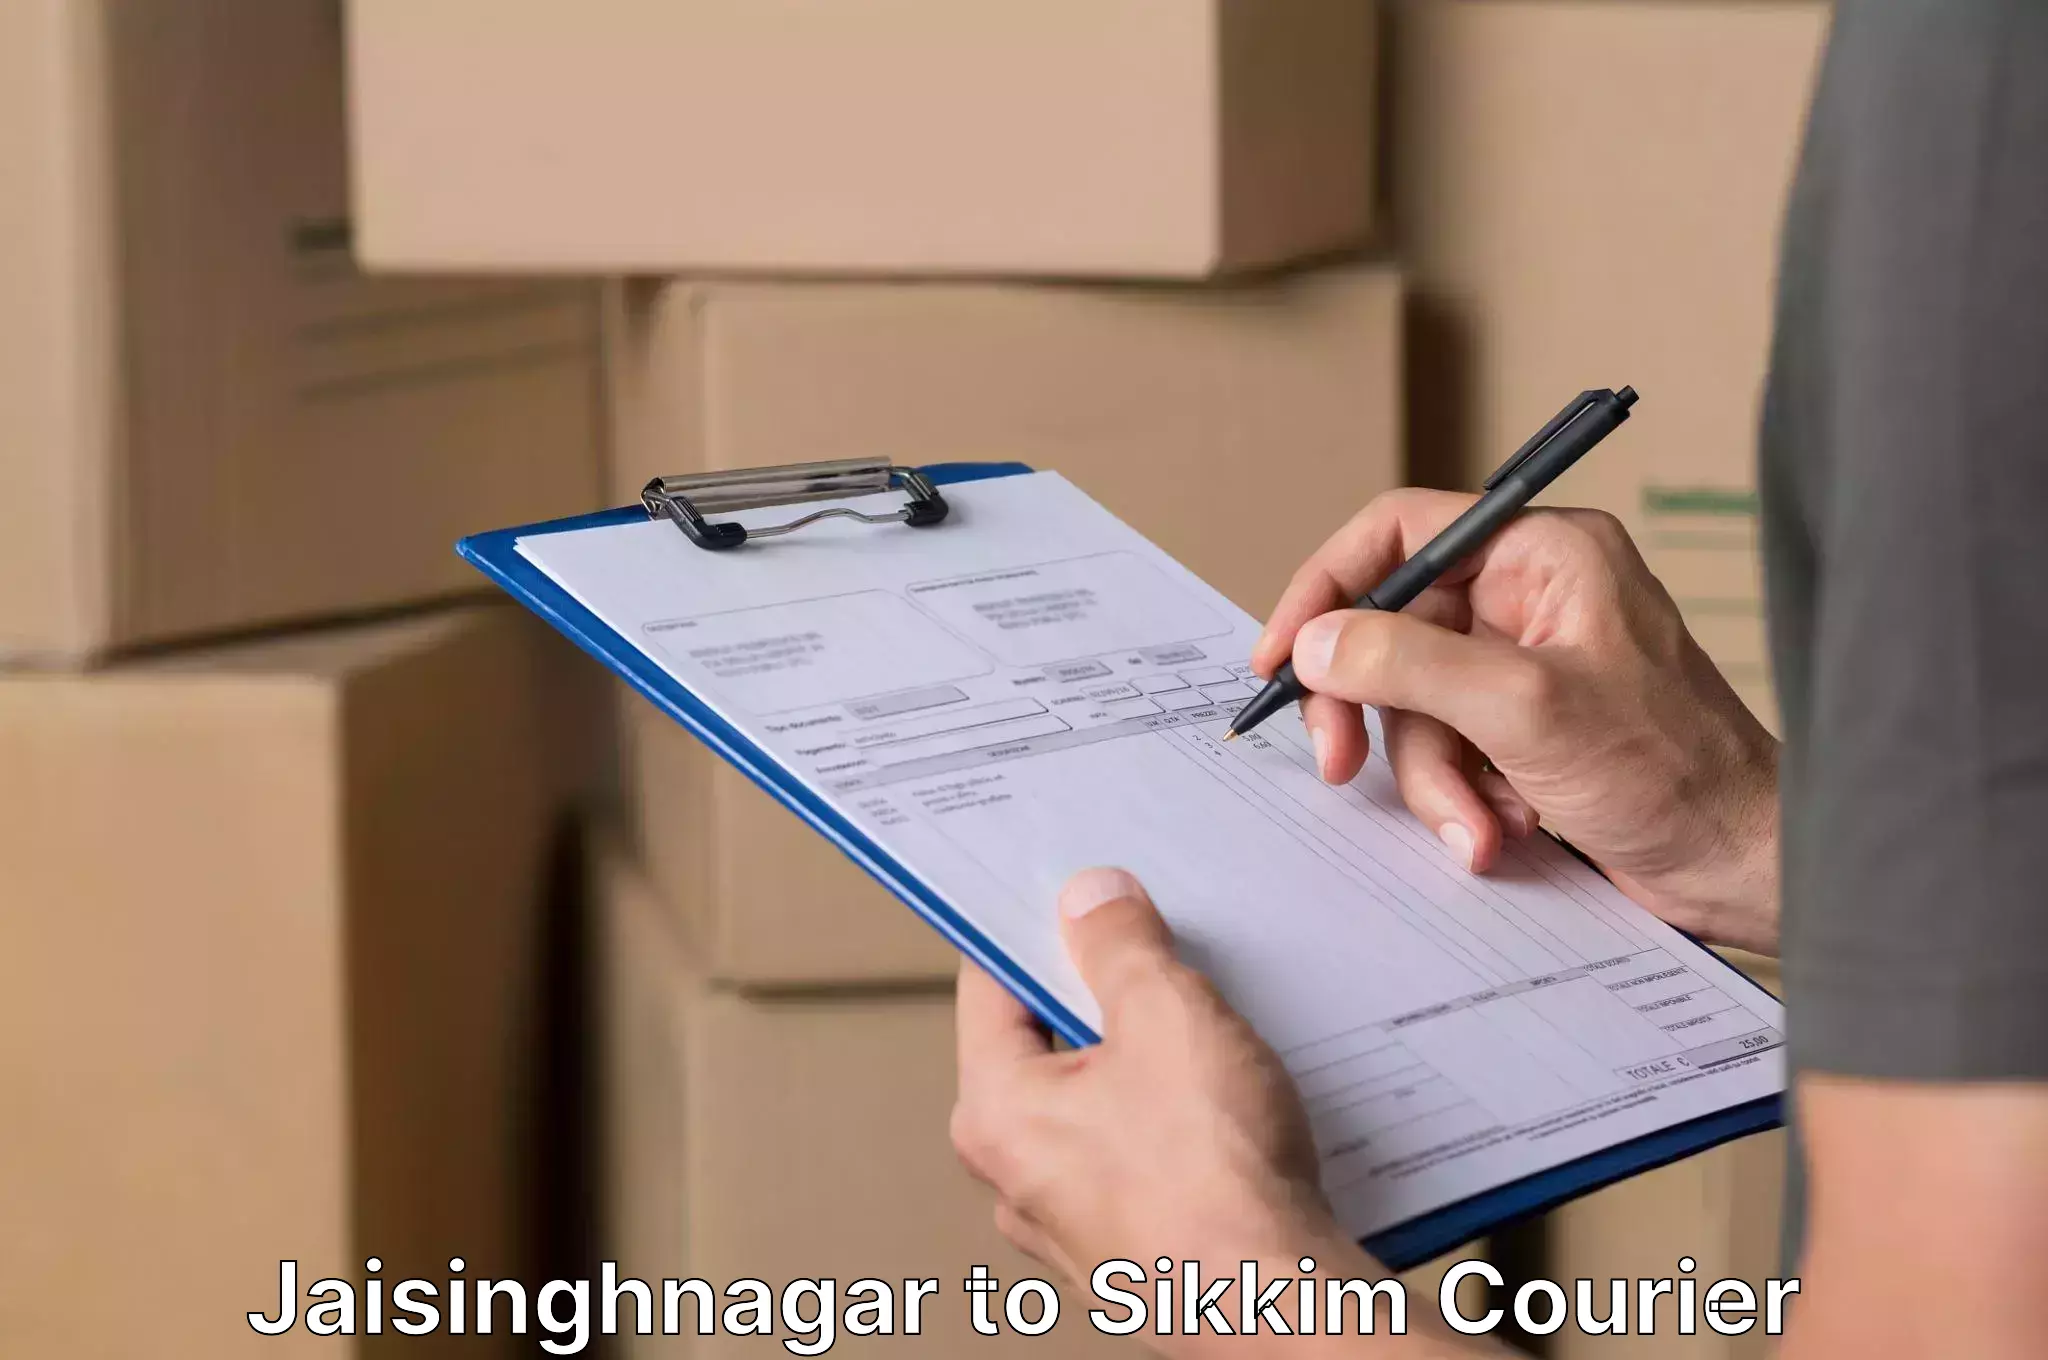 Quality moving and storage Jaisinghnagar to Sikkim